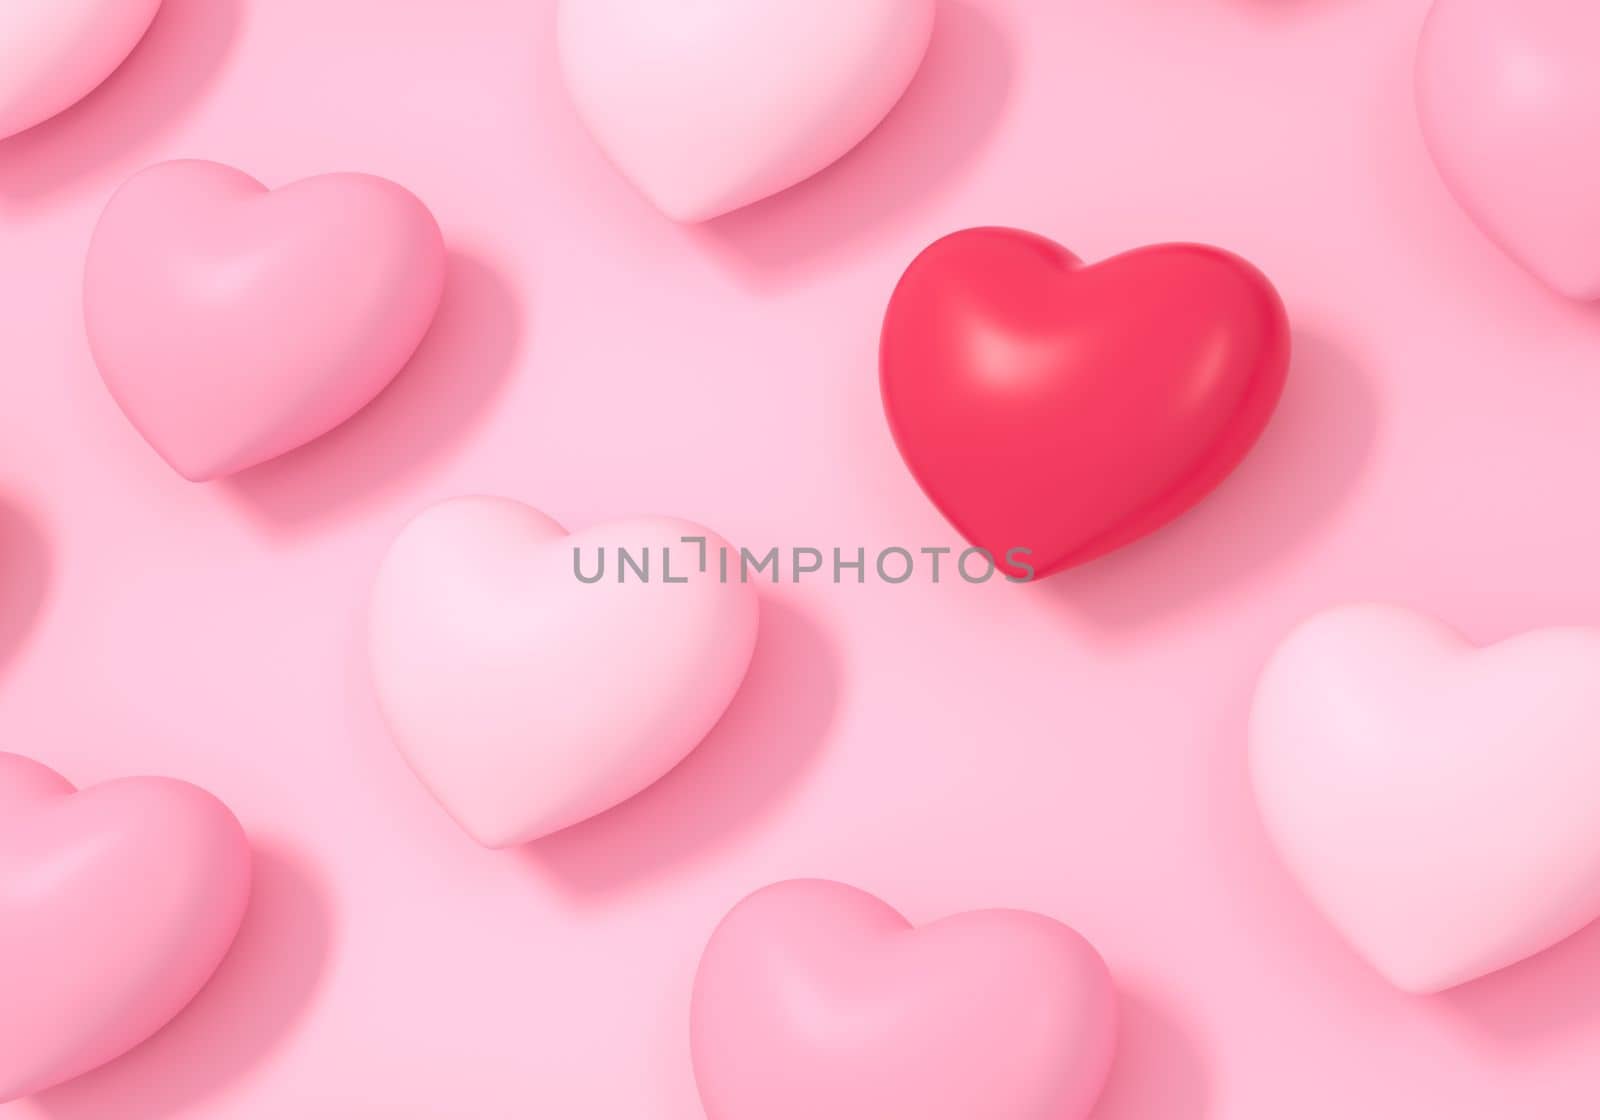 Hearts seamless pattern on pink background for Happy Mother's or Valentine's Day greeting card design. 3D Illustration.